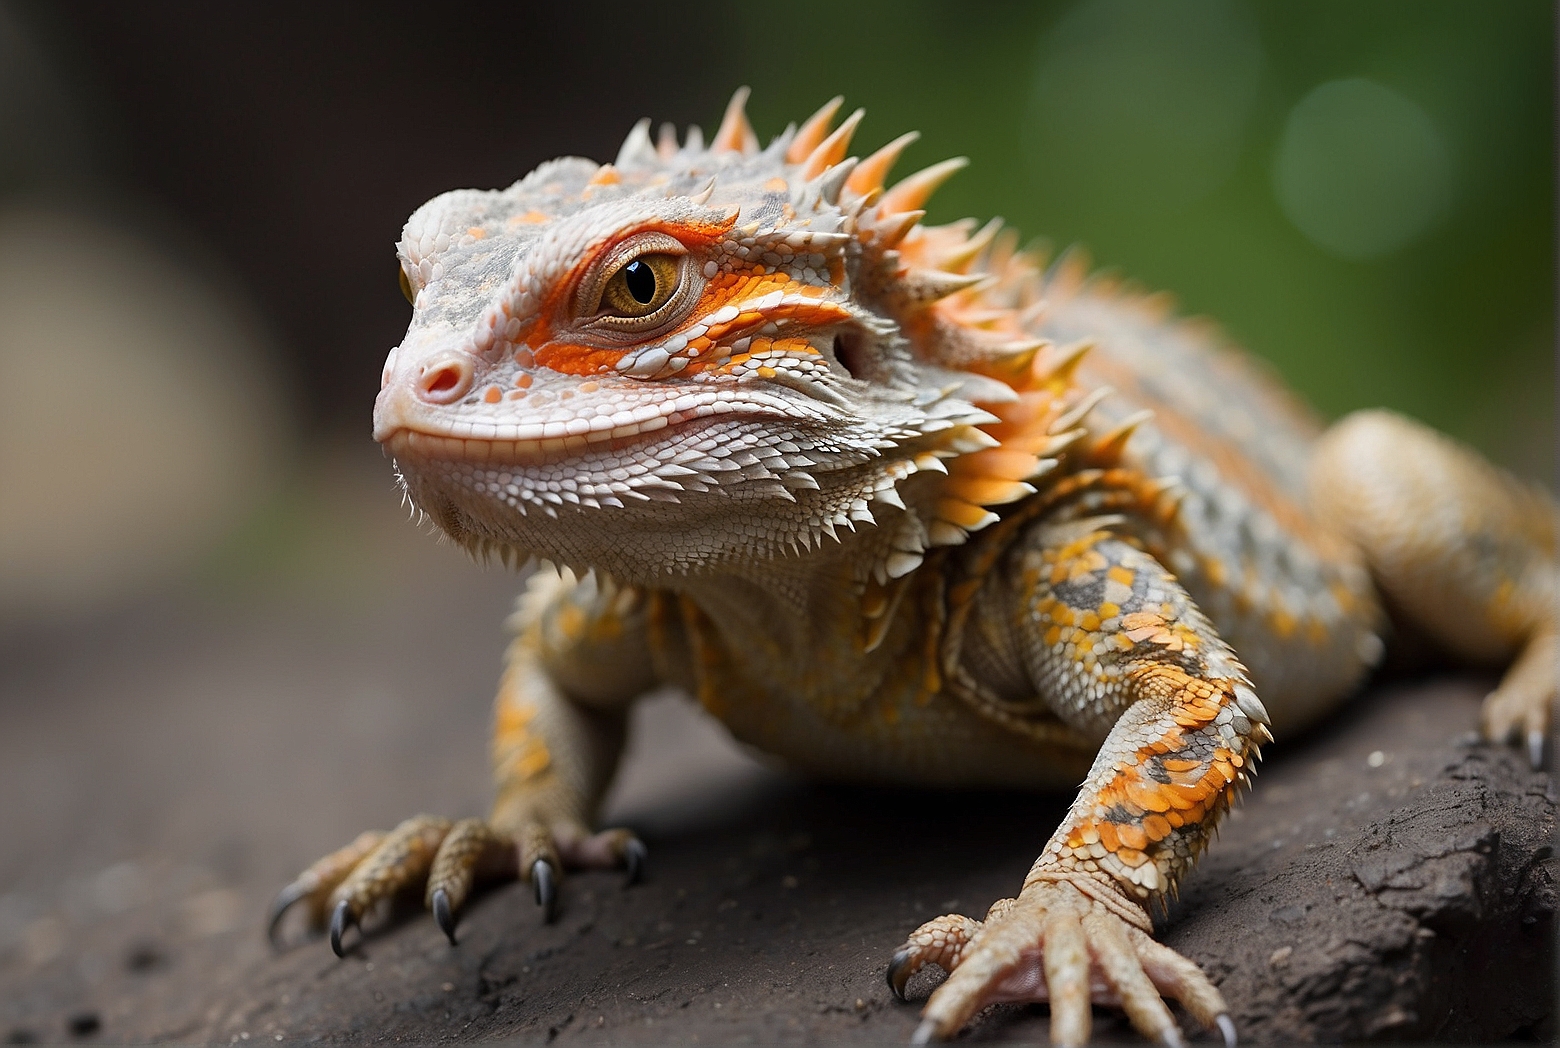 How Does Age Affect A Bearded Dragons Behavior?